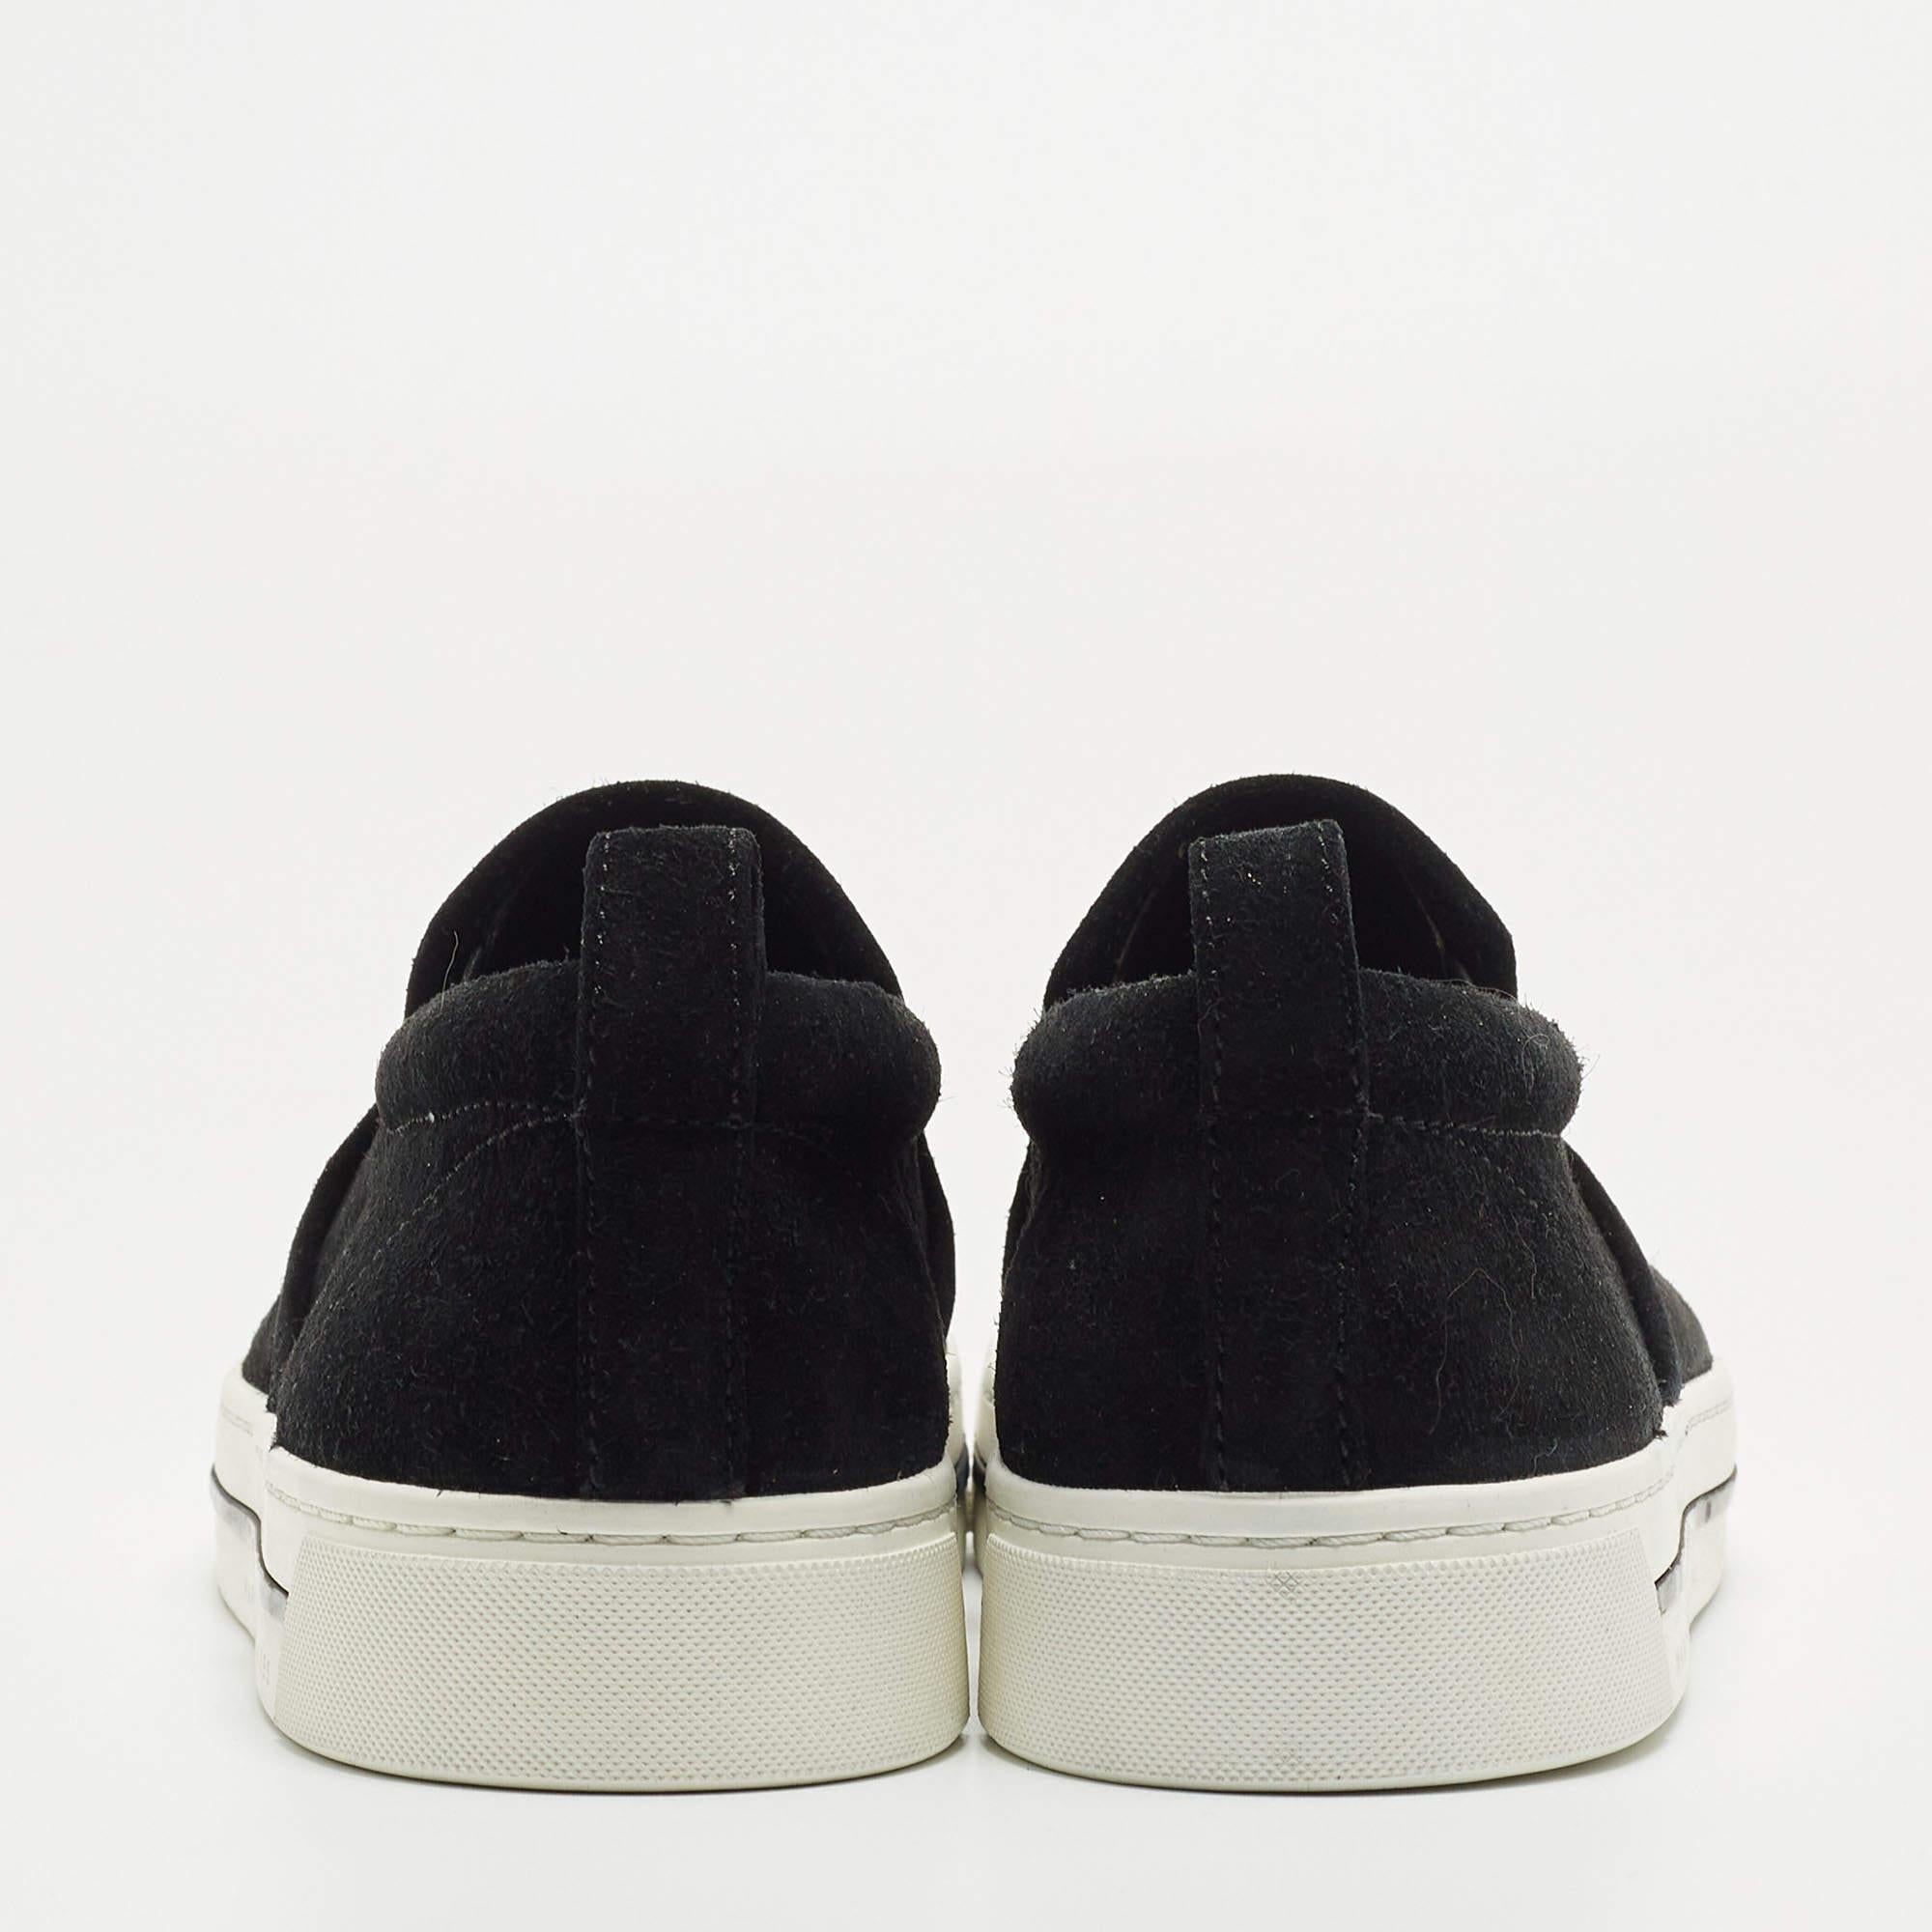 Marc By Marc Jacobs Black Suede GRRL Slip On Sneakers Size 37 1